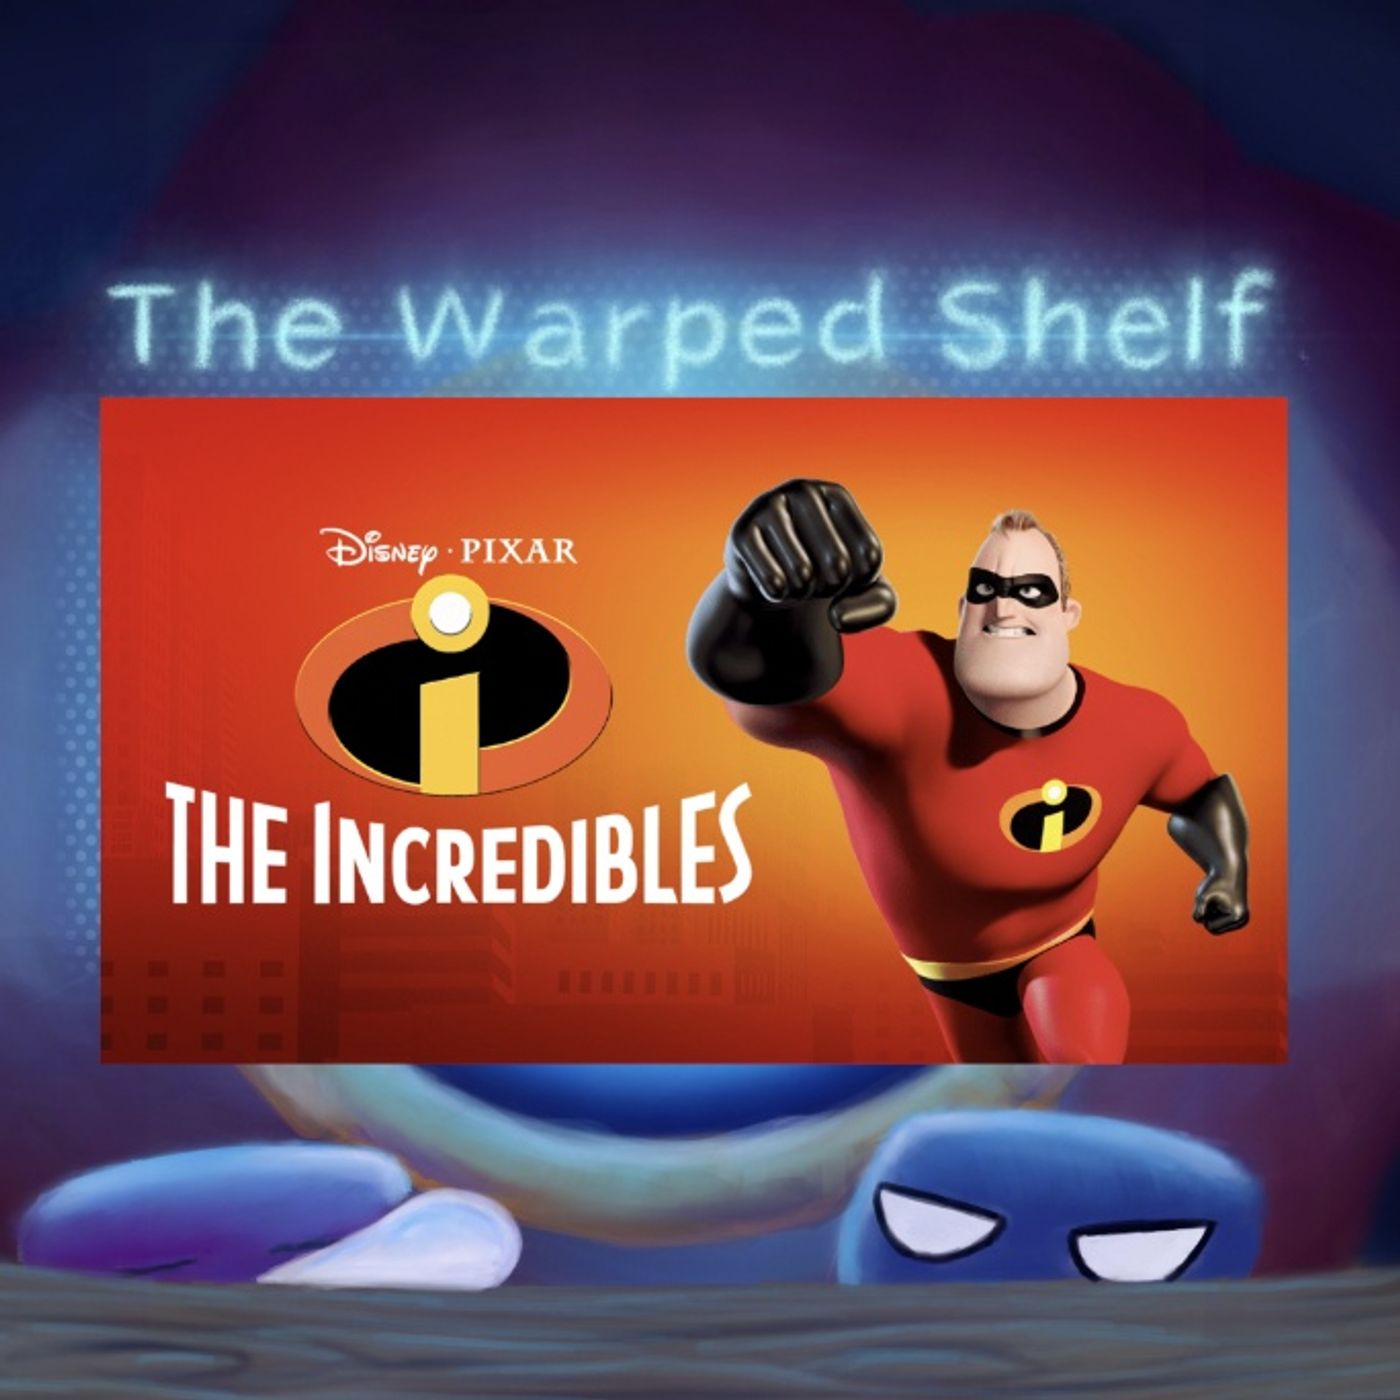 The Warped Shelf - The Incredibles